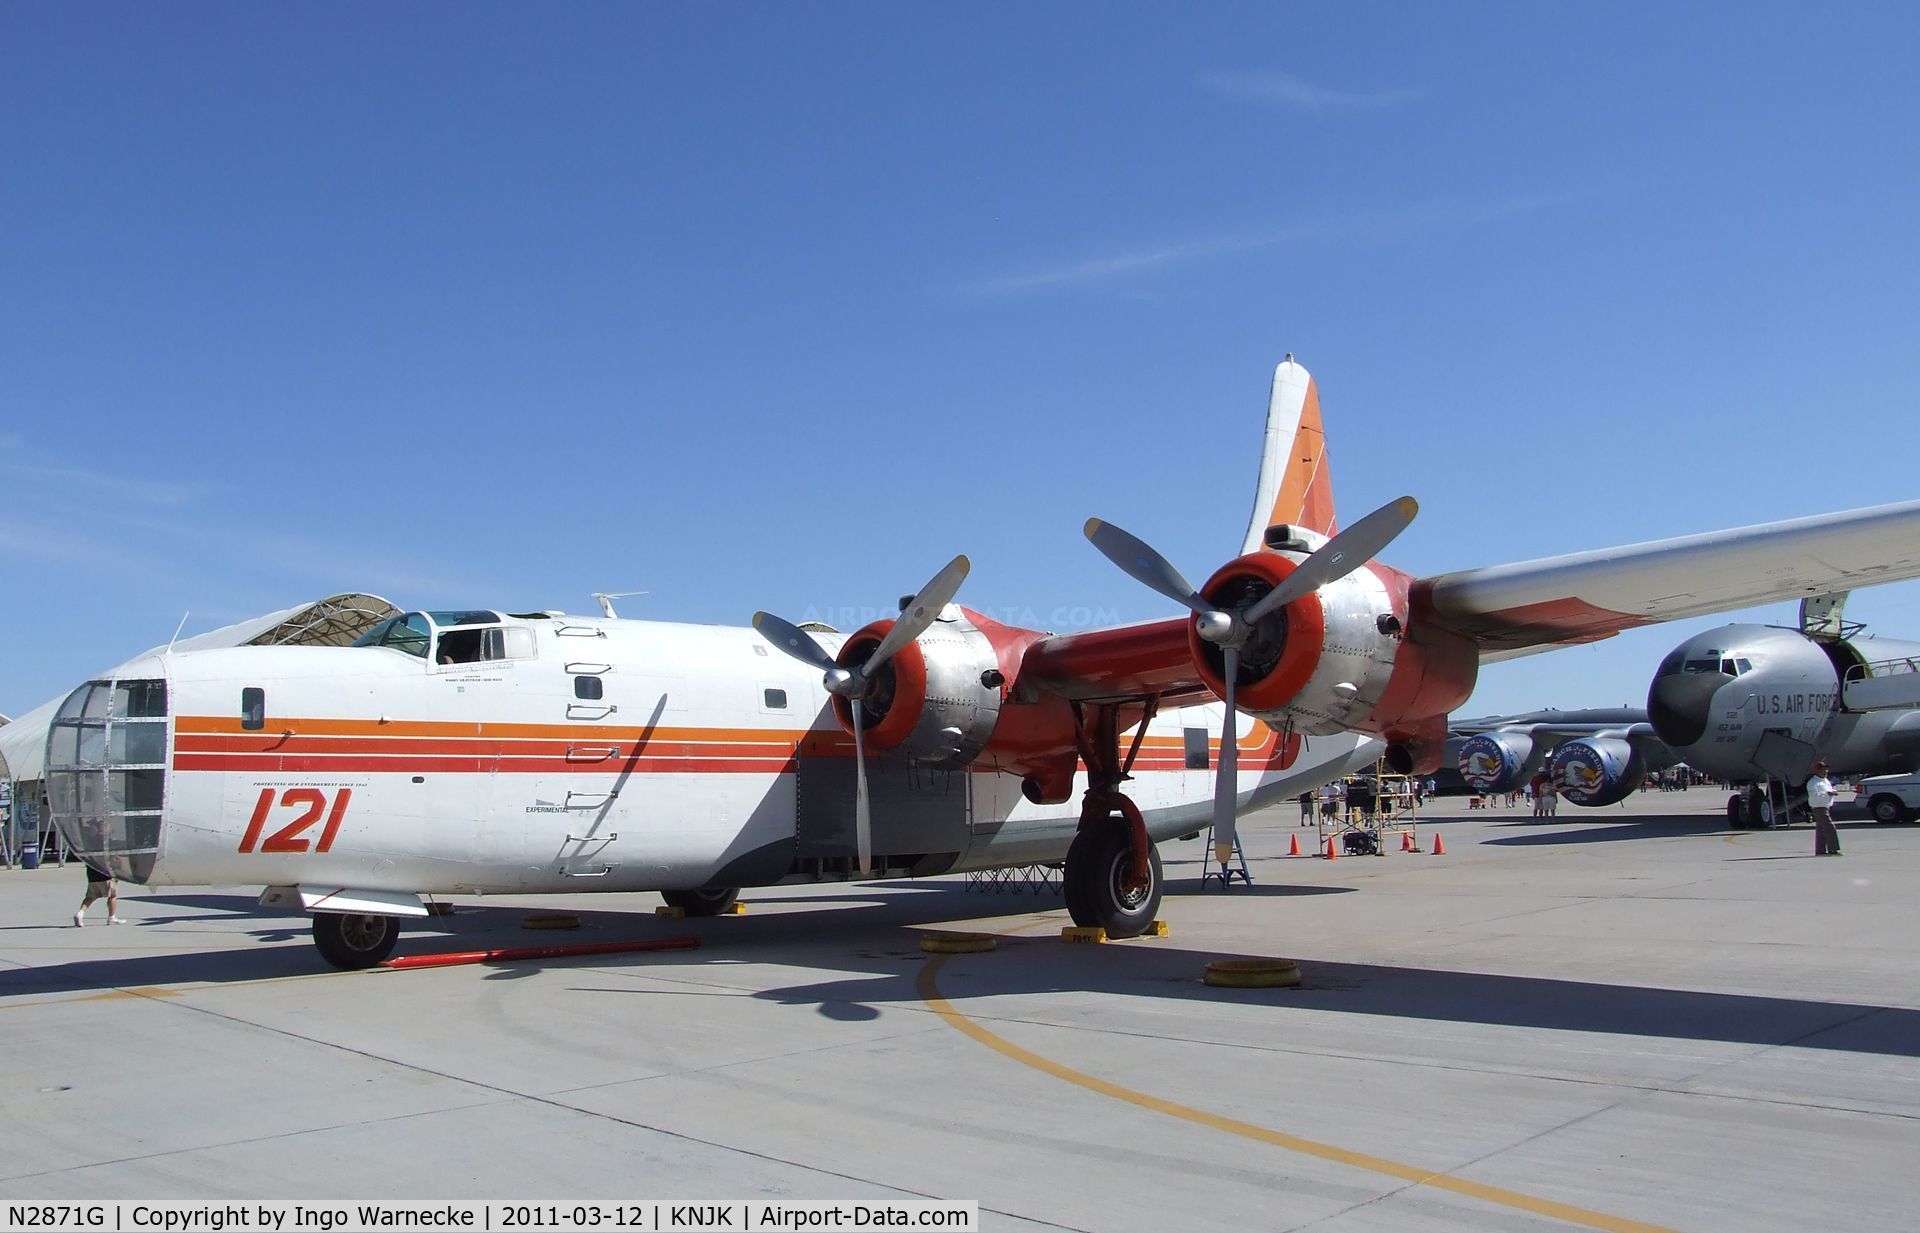 N2871G, Consolidated Vultee P4Y-2 Privateer C/N 66302, Consolidated PB4Y-2 Privateer (converted to water bomber) at the 2011 airshow at El Centro NAS, CA